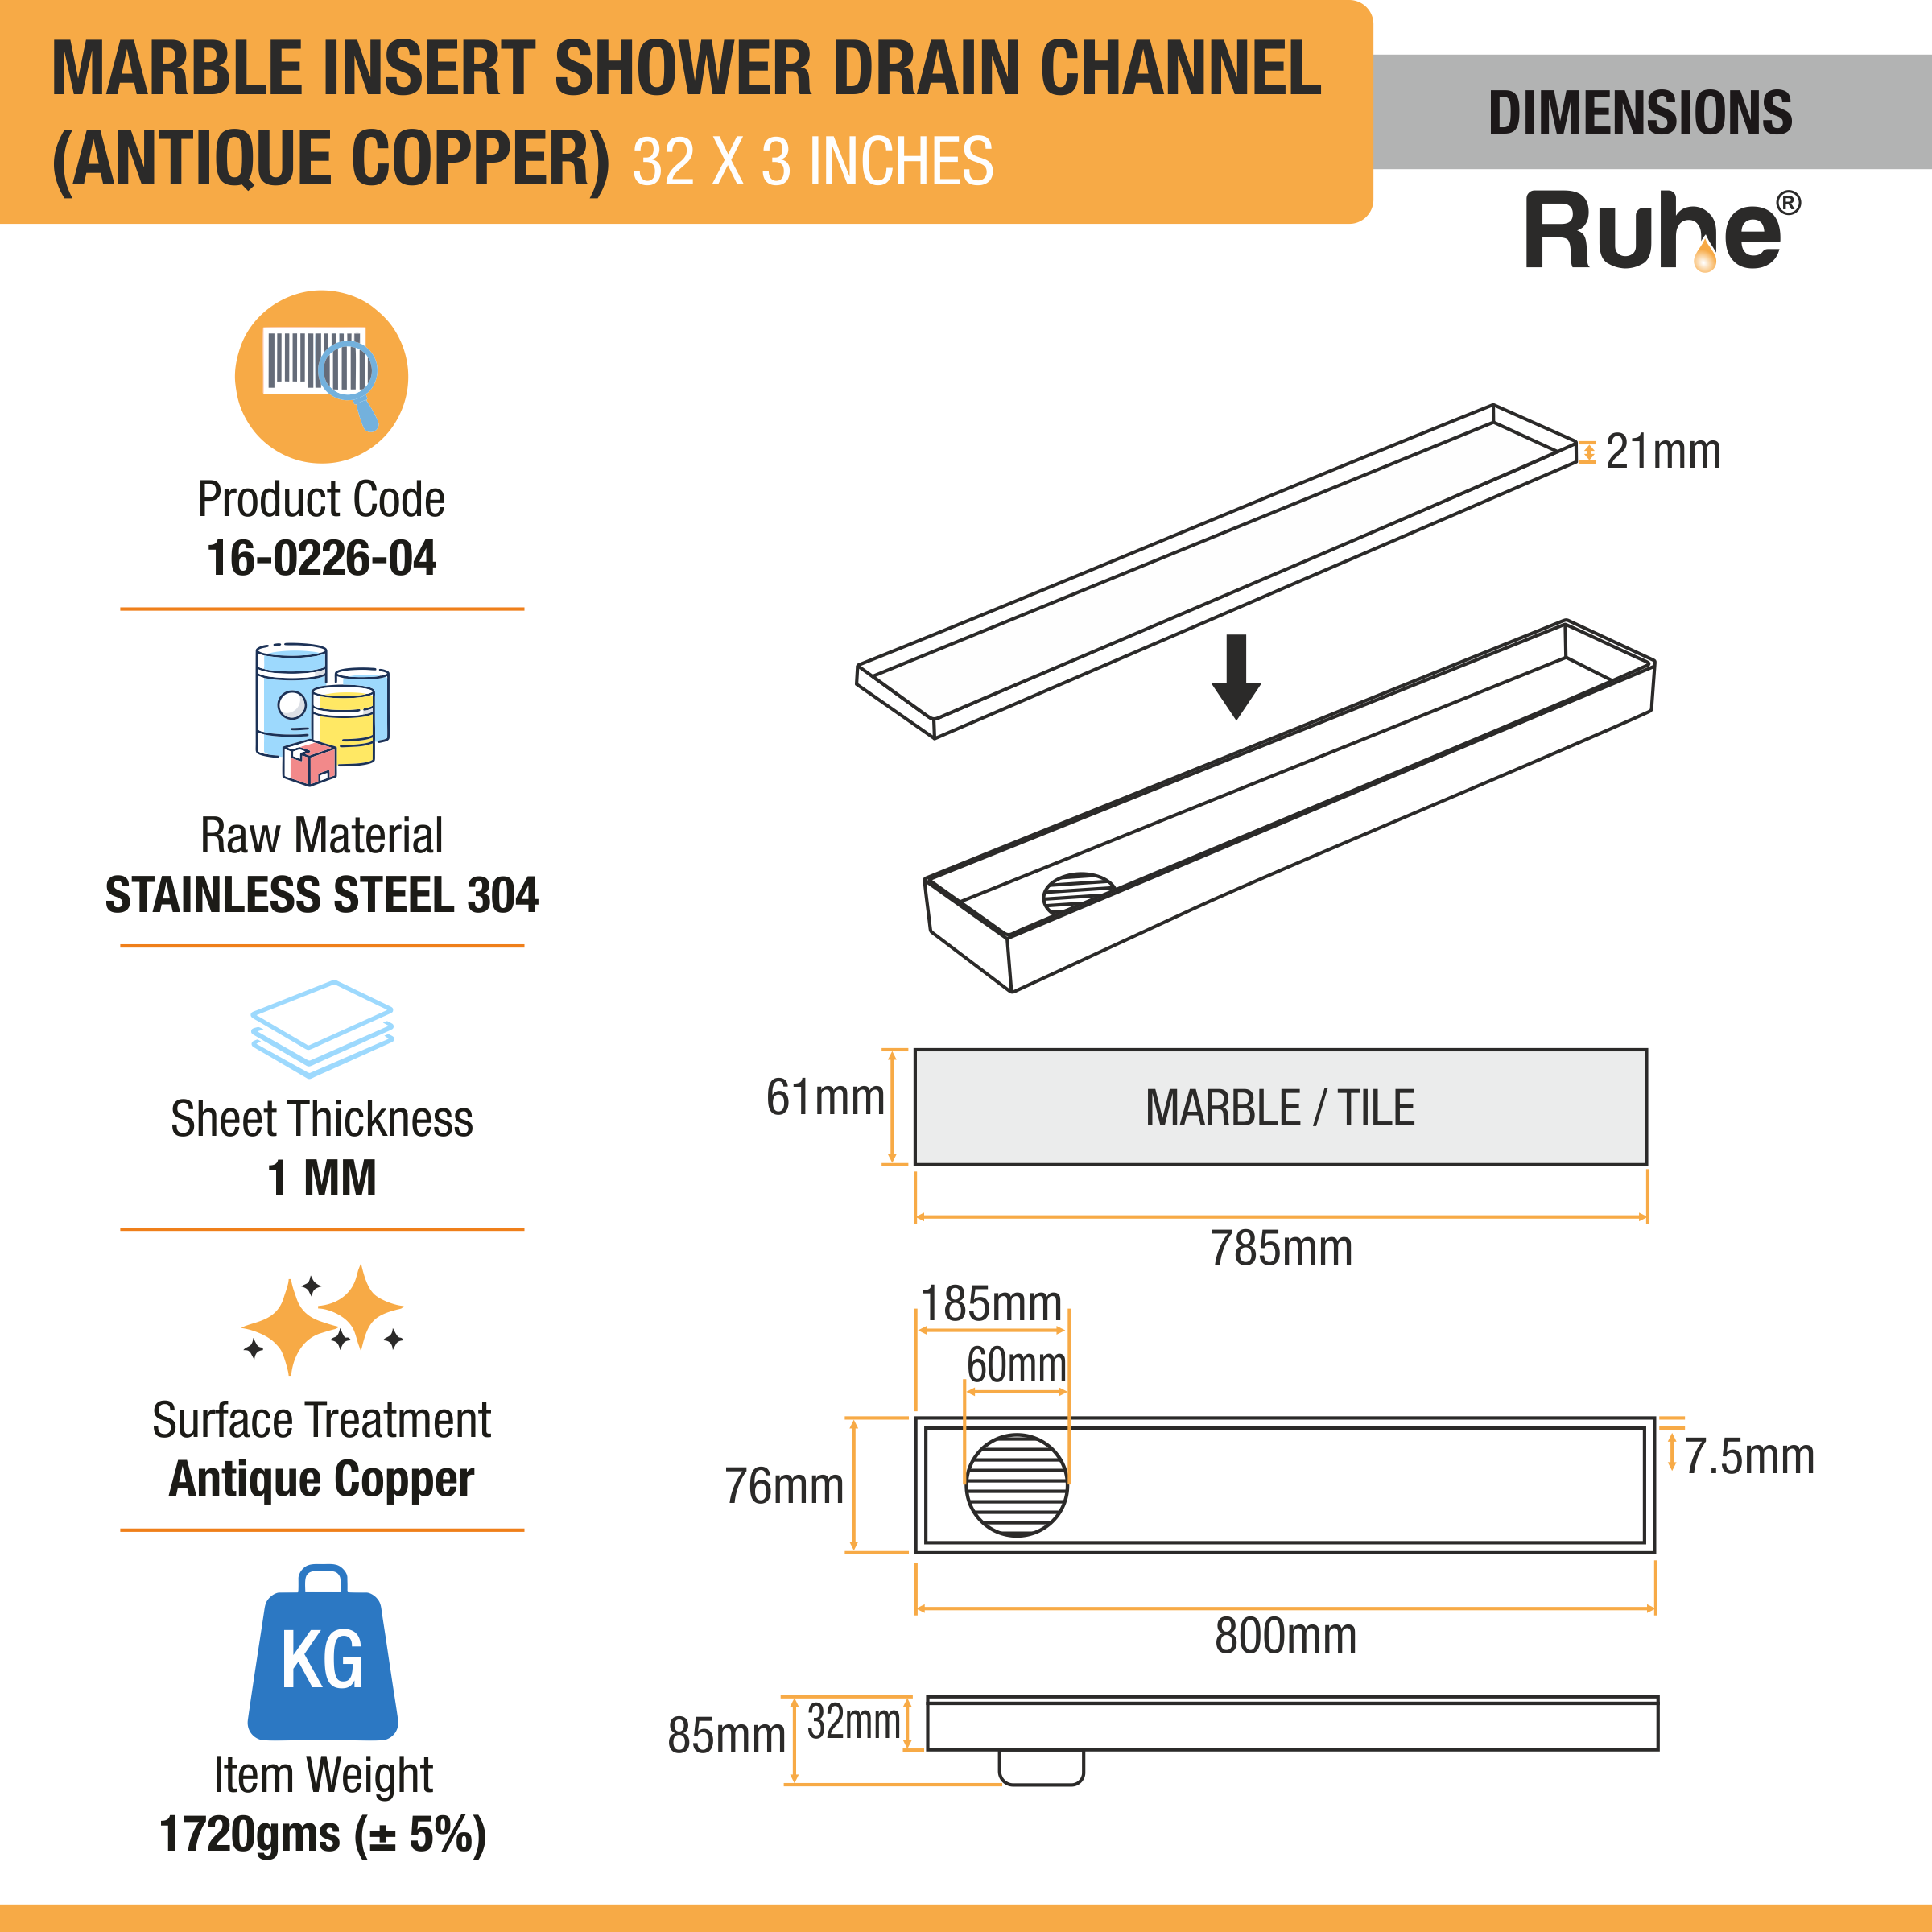 Marble Insert Shower Drain Channel (32 x 3 Inches) ROSE GOLD PVD Coated dimensions and sizes